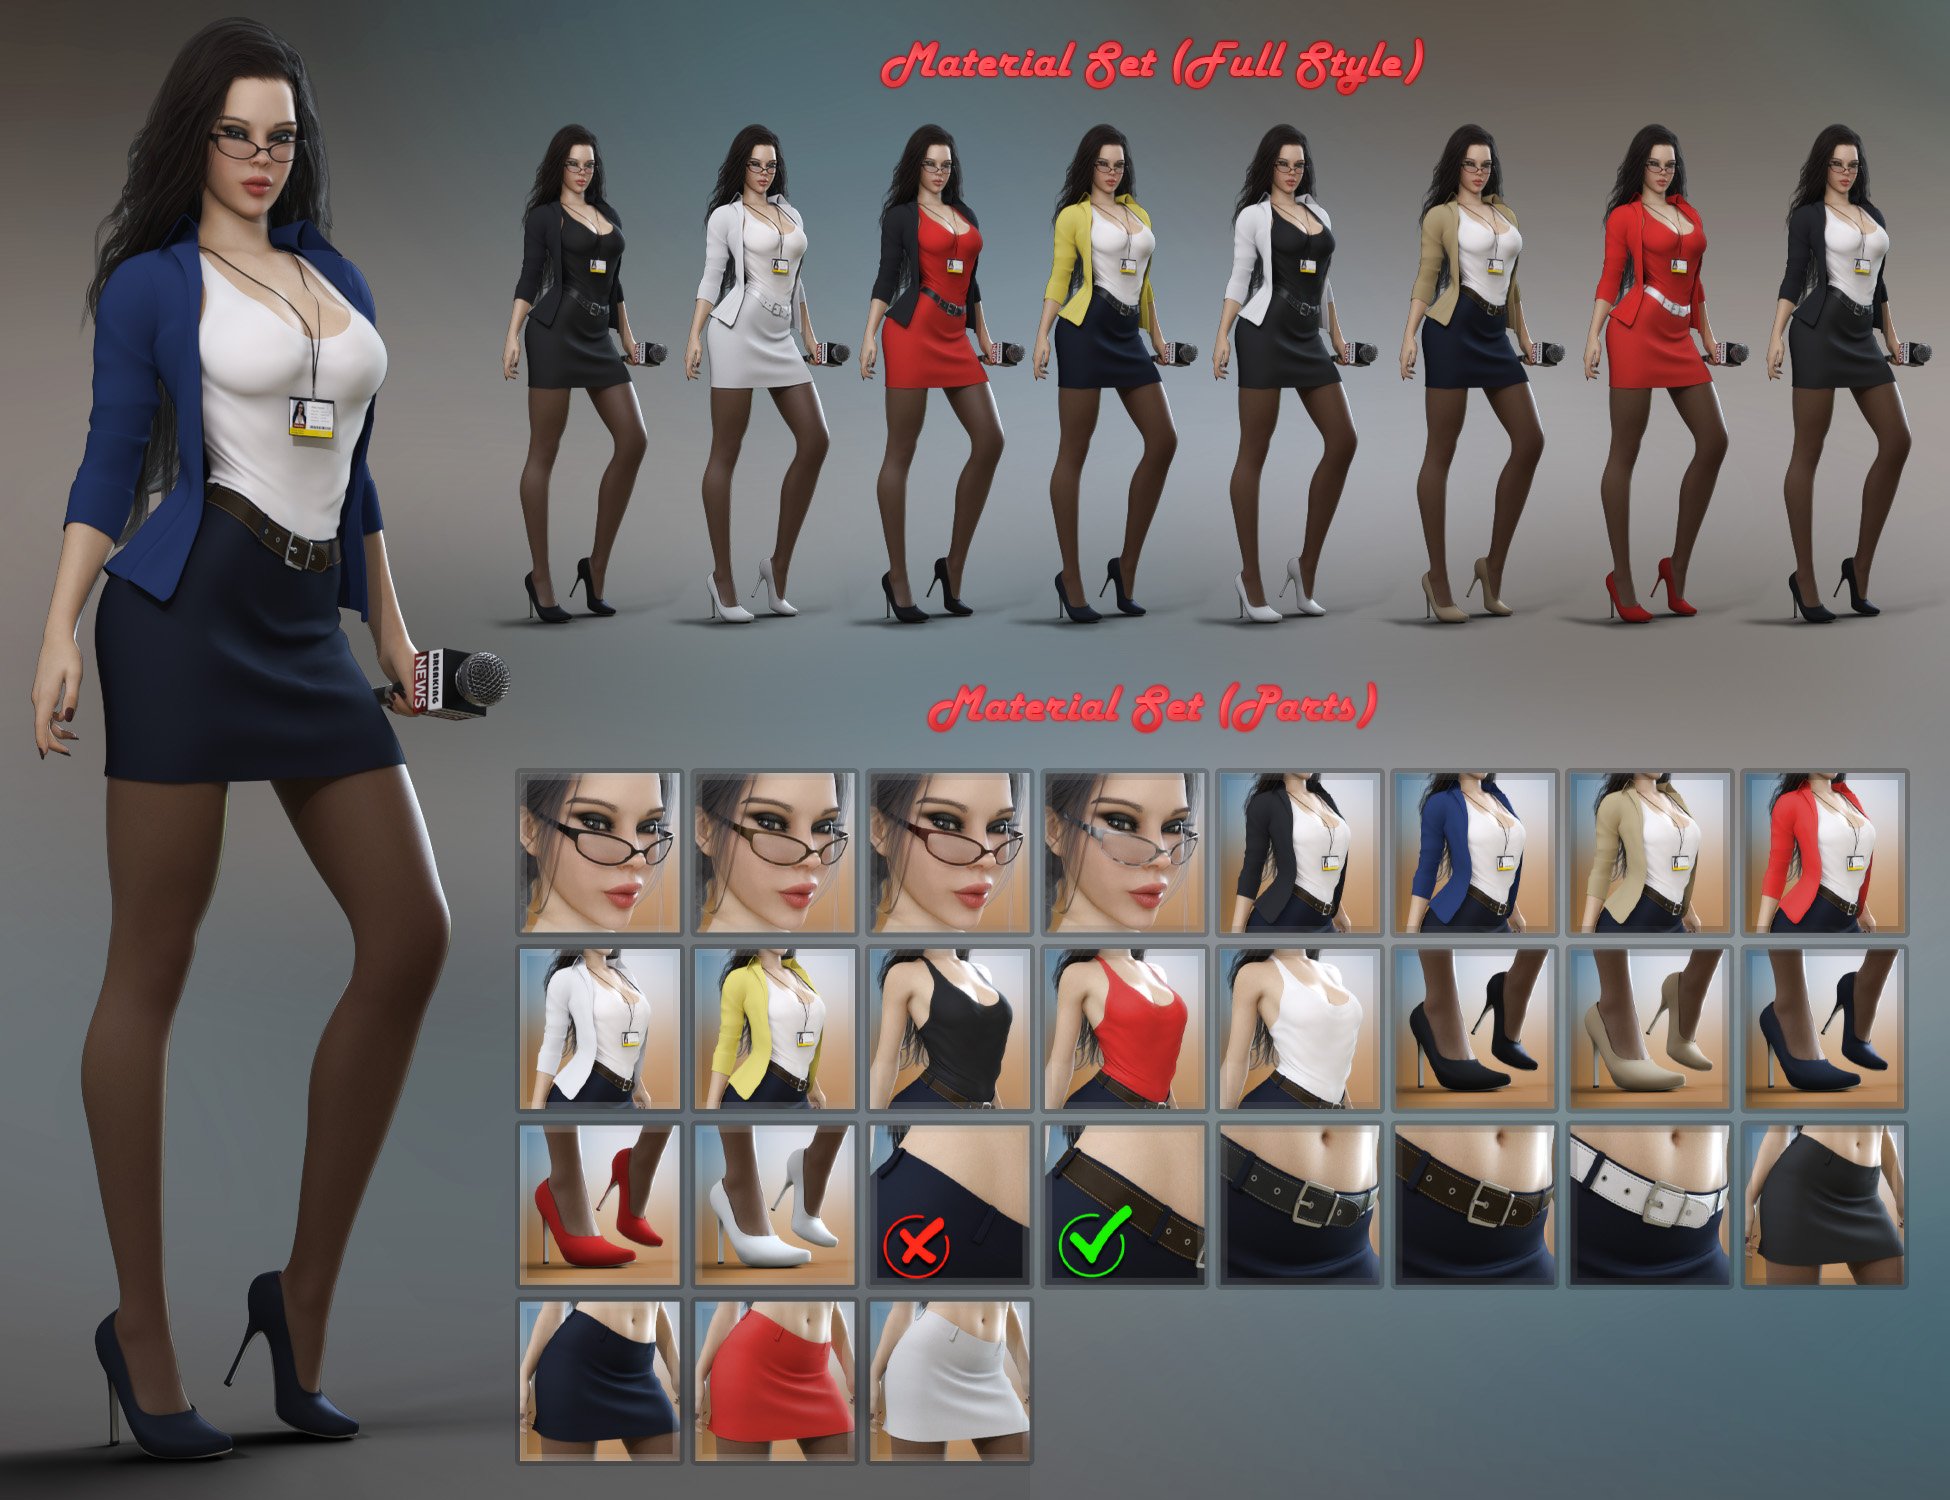 News Reporter Outfit with dForce for Genesis 8 and 8.1 Females by: Pretty3D, 3D Models by Daz 3D